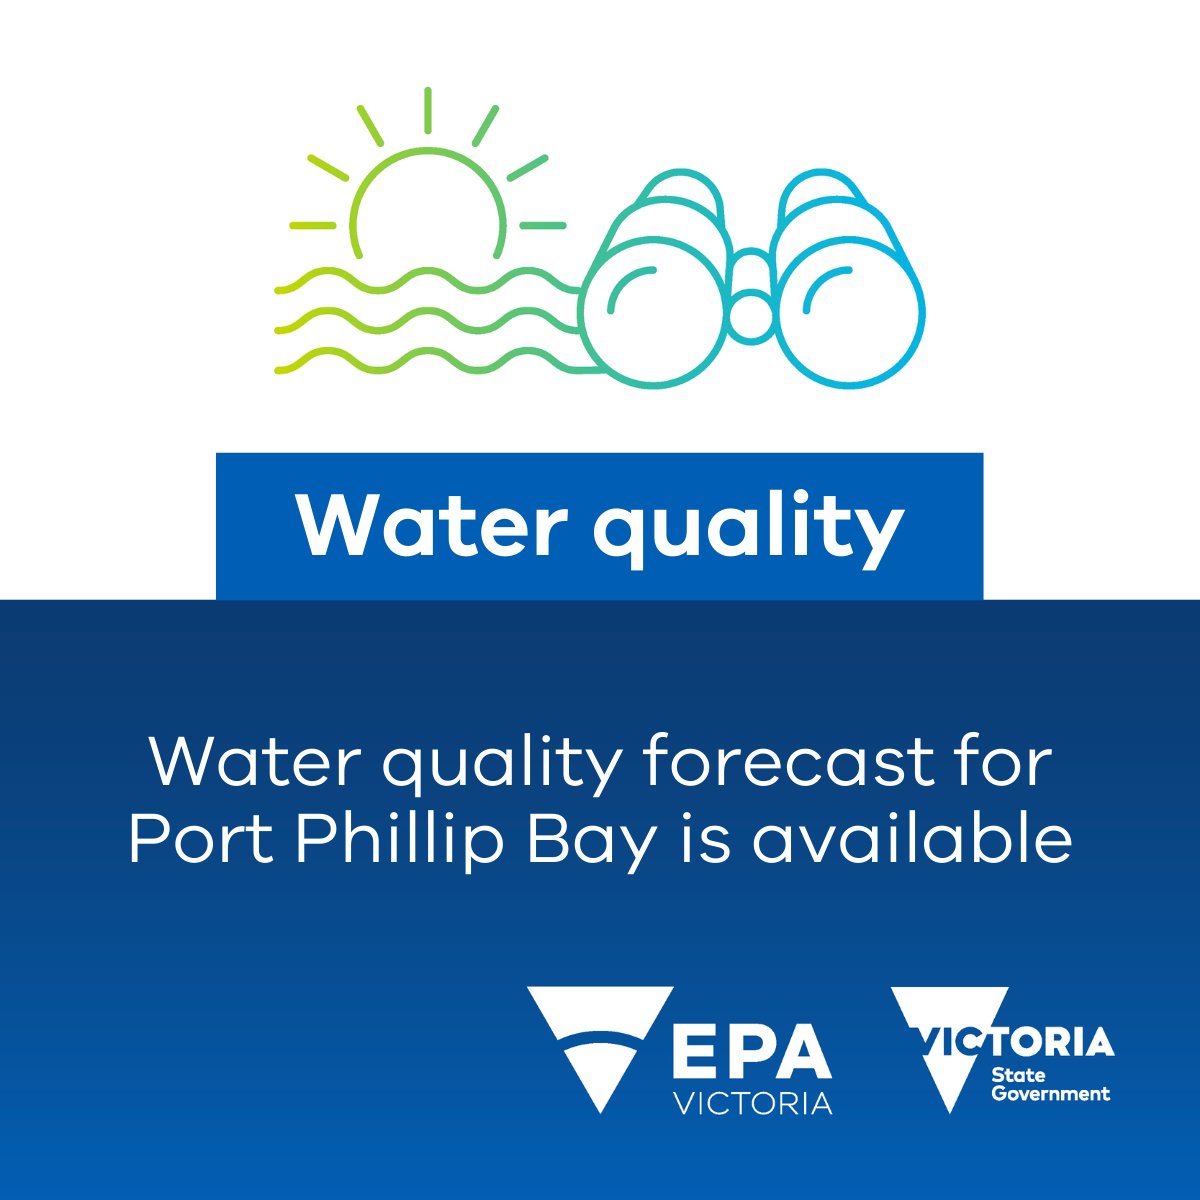 Beach Report forecast for Wed 9 May: 36 beaches rated good.

Yarra River: Kew, Healesville and Launching Place are rated poor. Warrandyte is rated good.